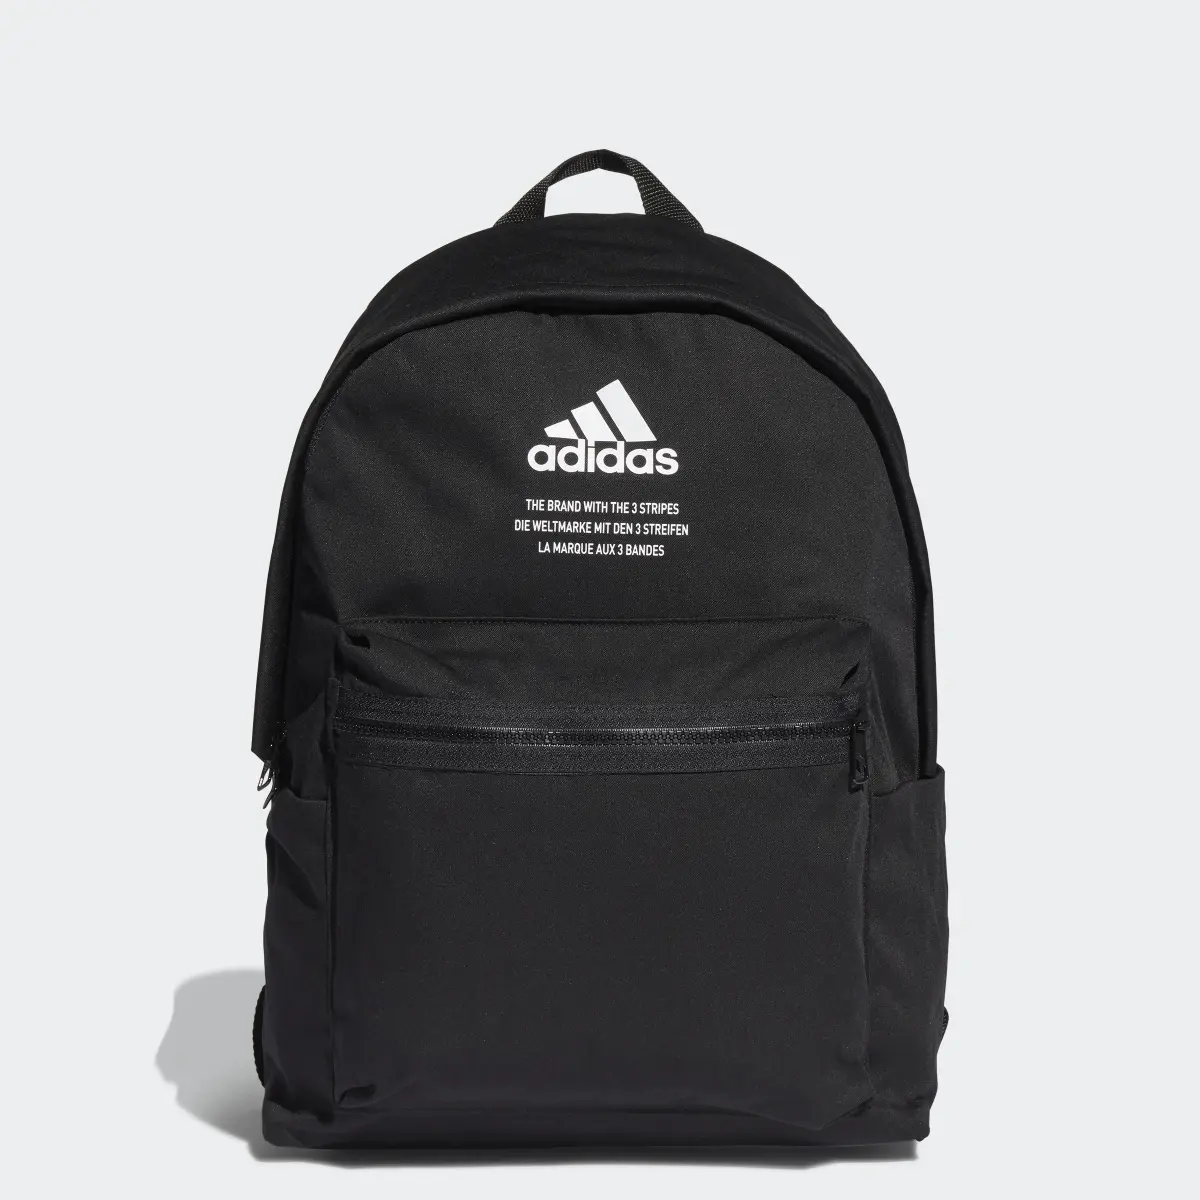 Adidas Classic Fabric Backpack. 1